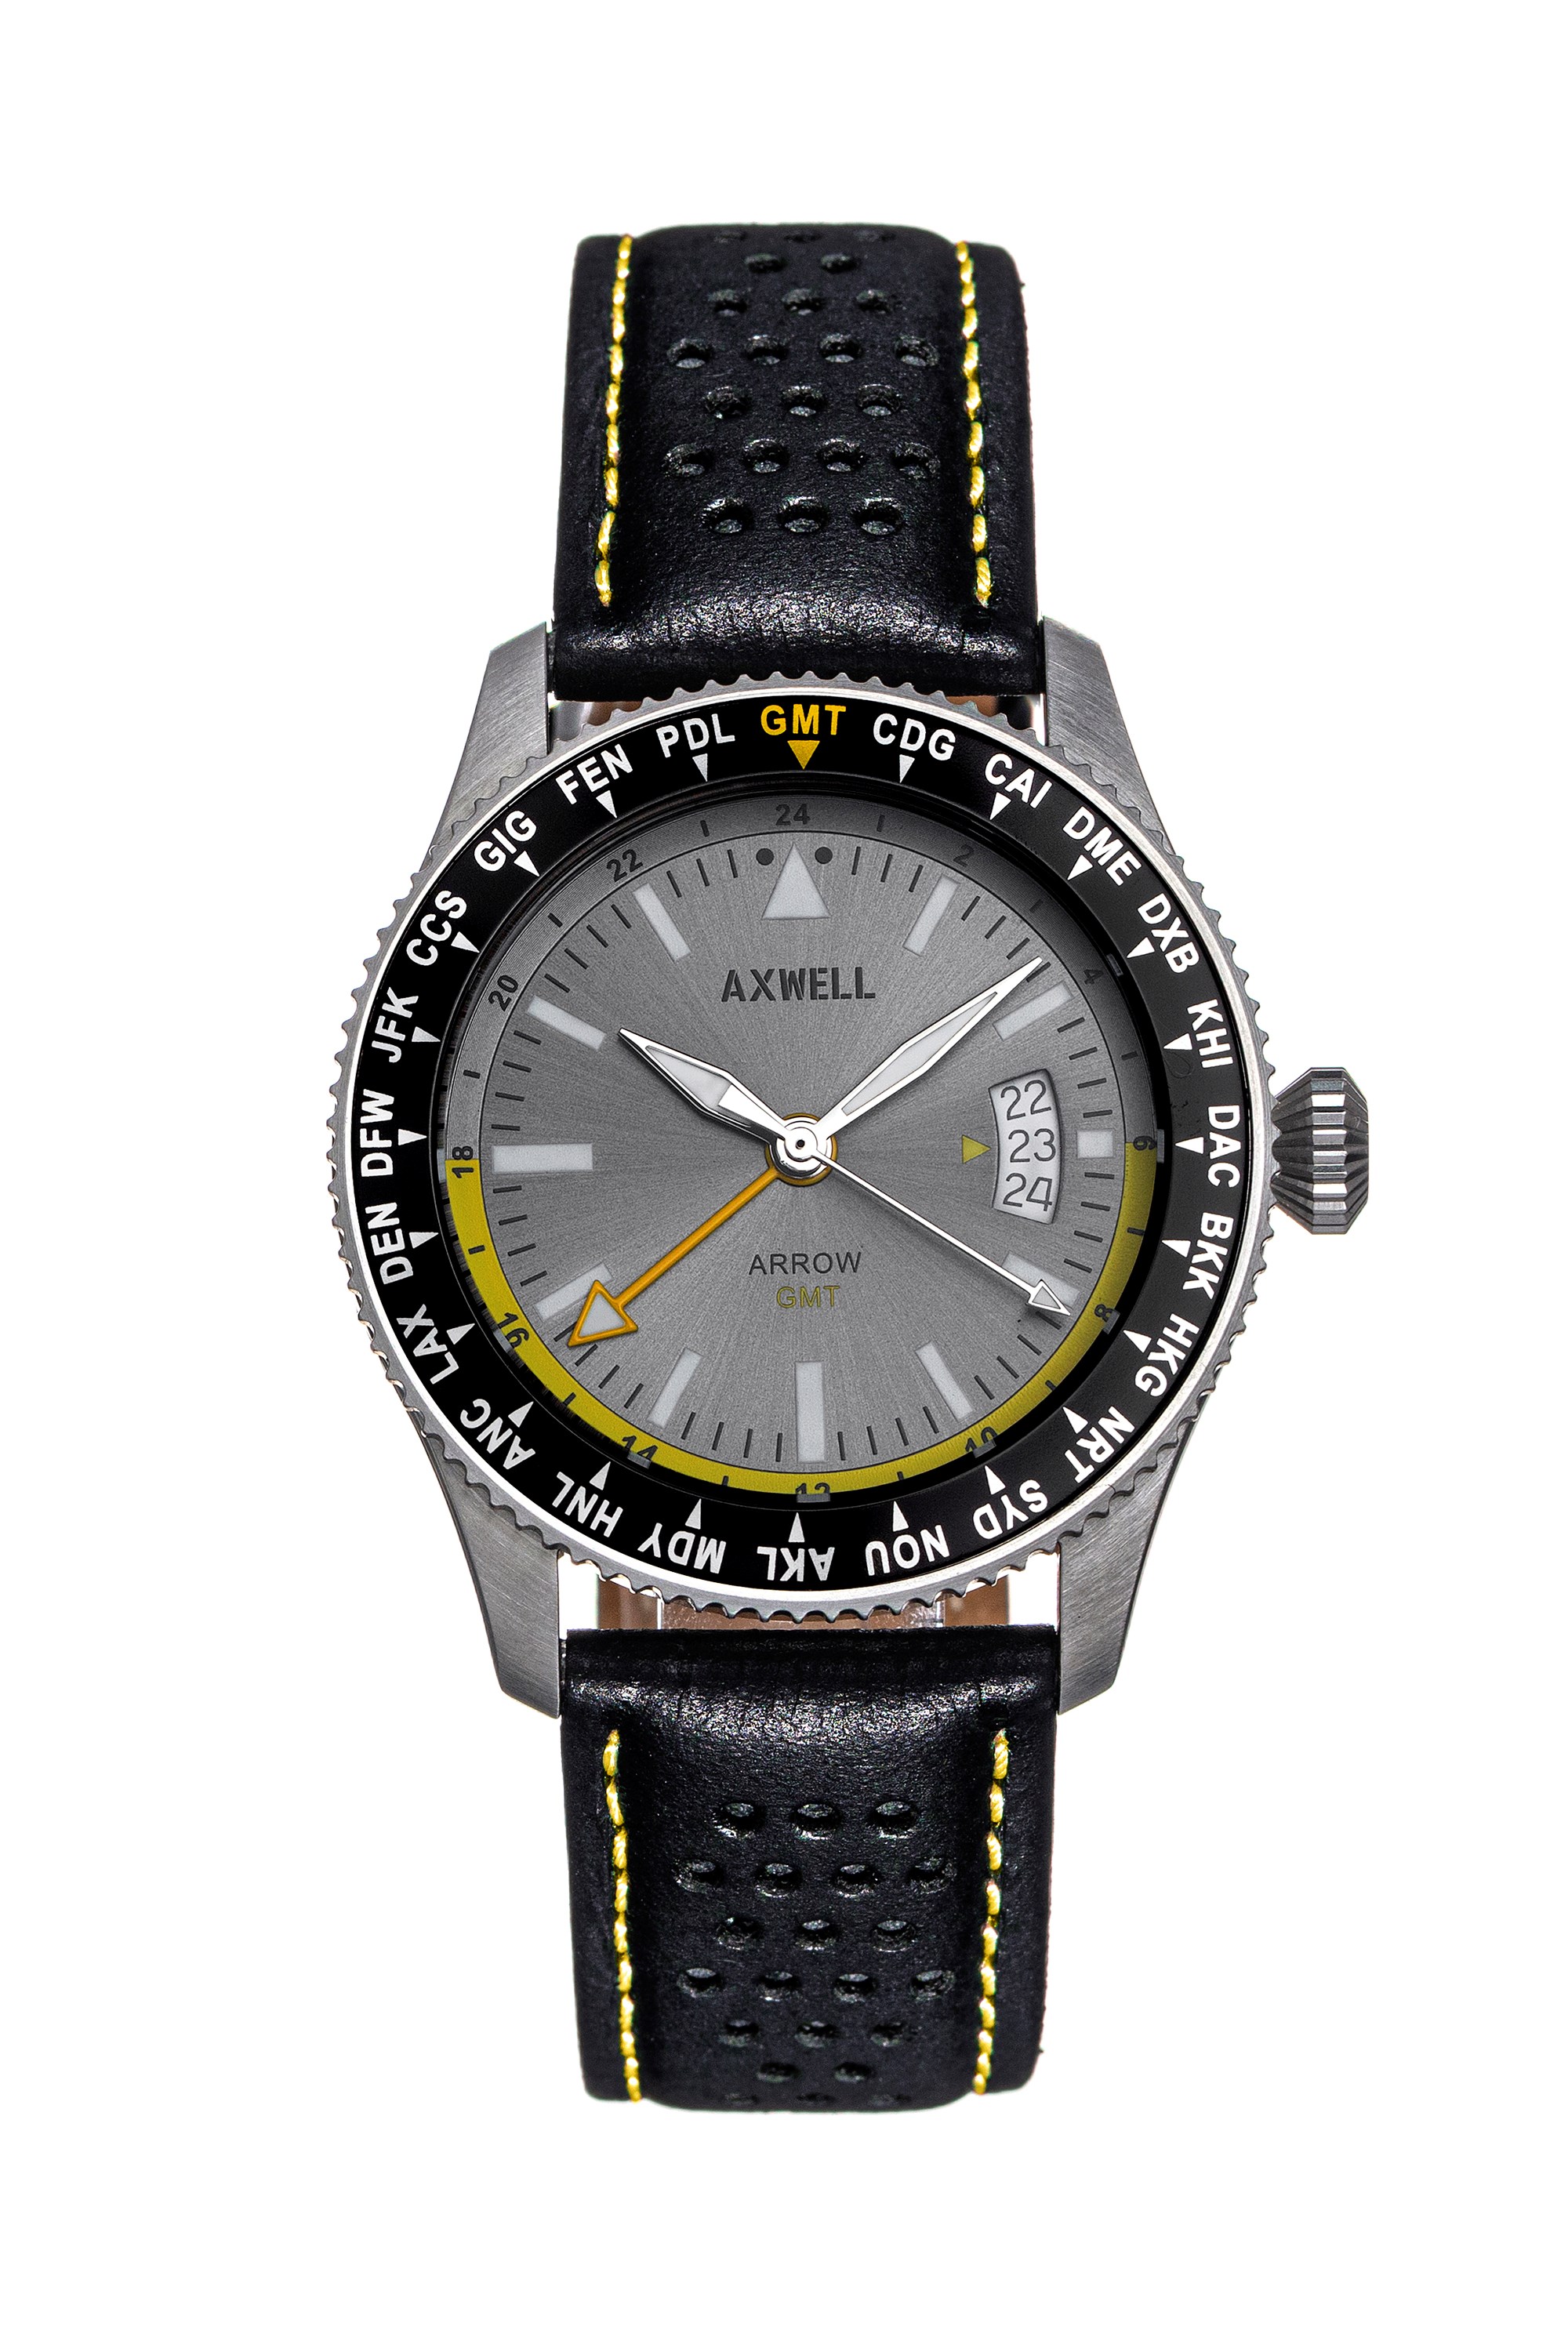 Arrow Leather Strap Deep Diving Watch With Date -